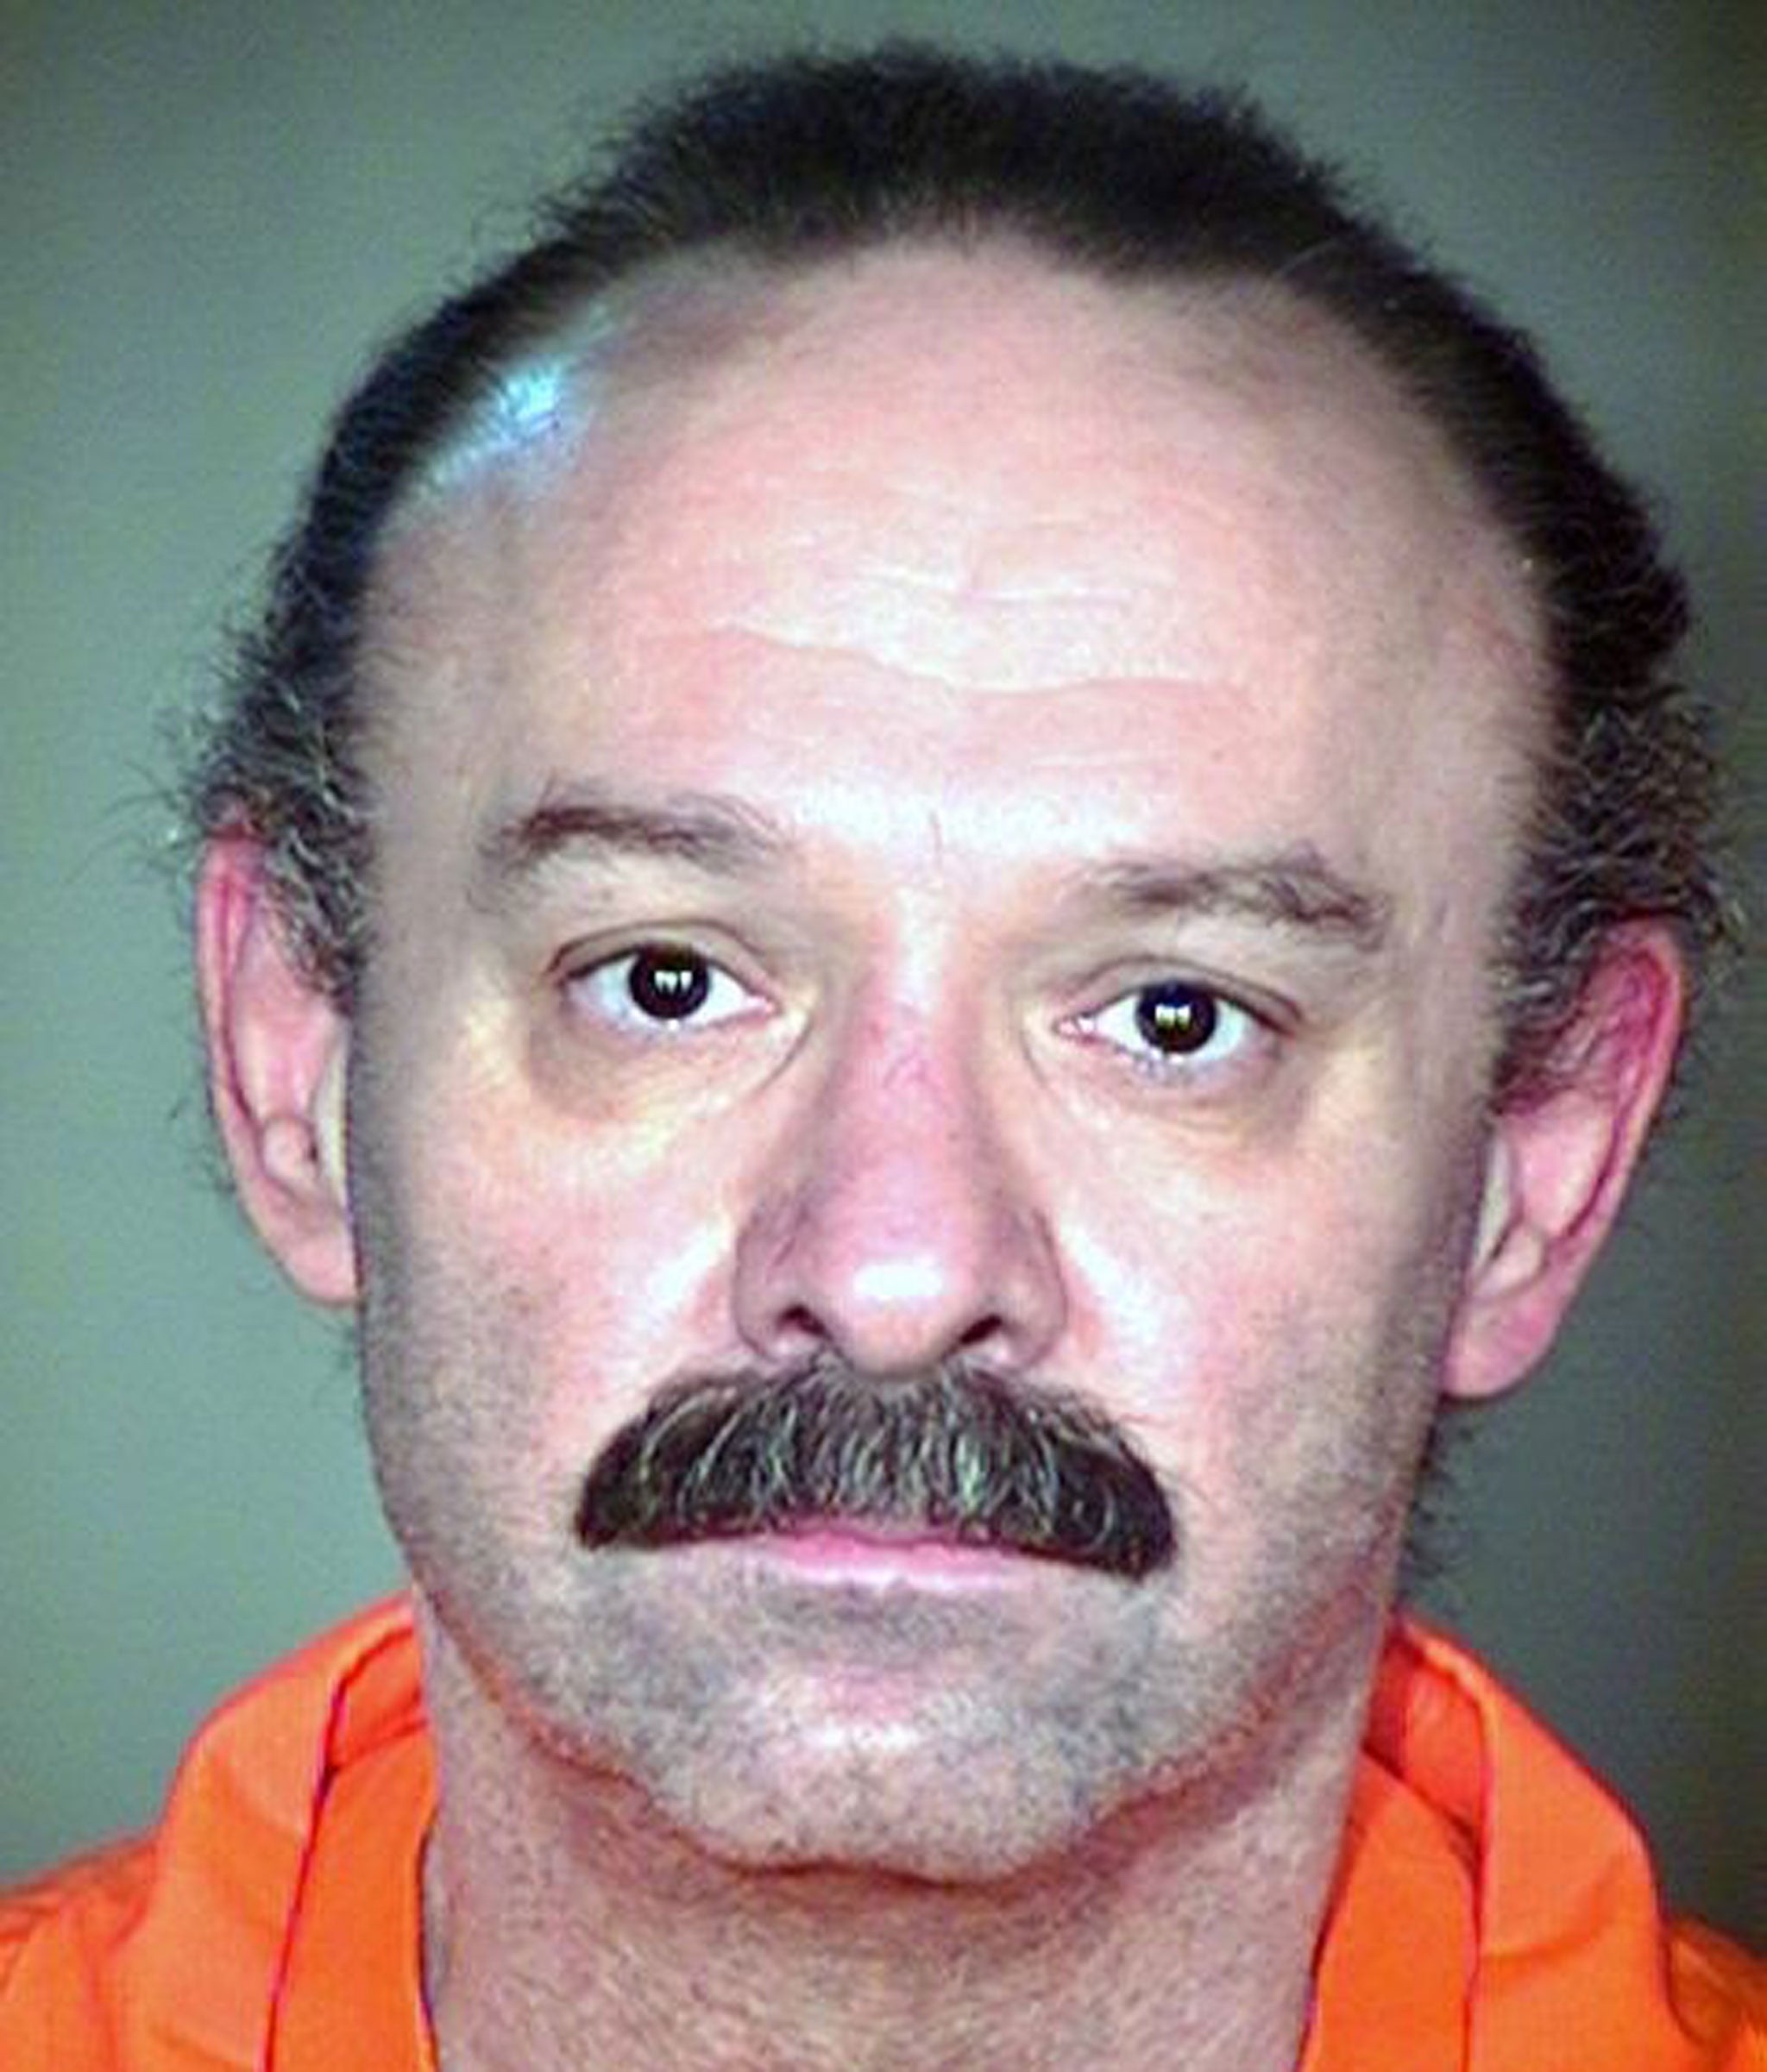 An undated Arizona Department of Corrections photo showing Joseph Rudolph Wood, who was sentenced to death for the killing in 1989 of his ex-girlfriend and her father